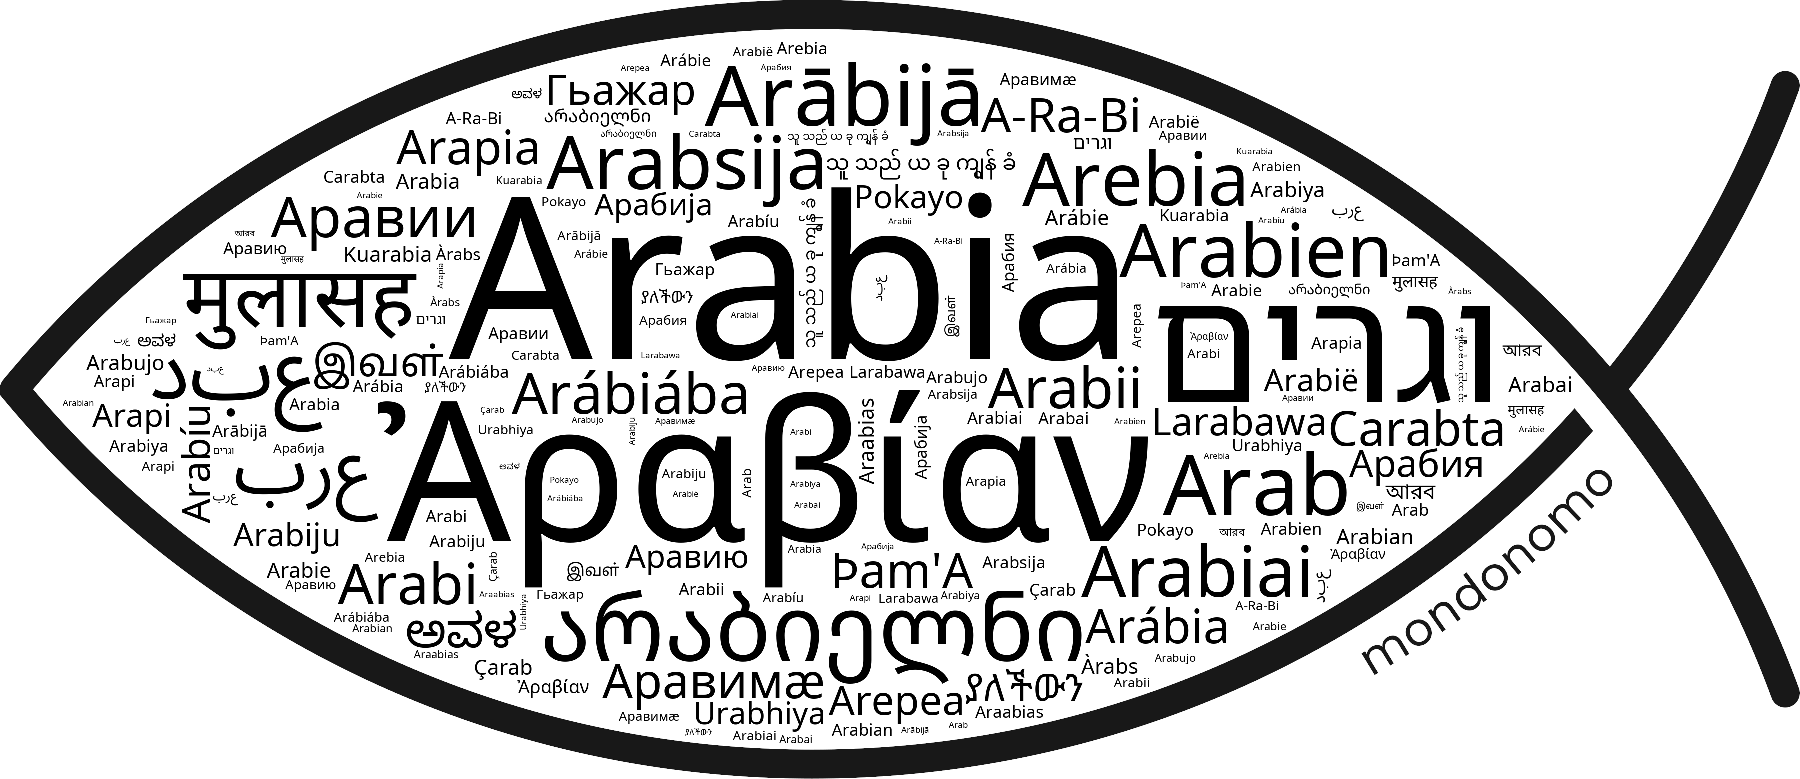 Name Arabia in the world's Bibles